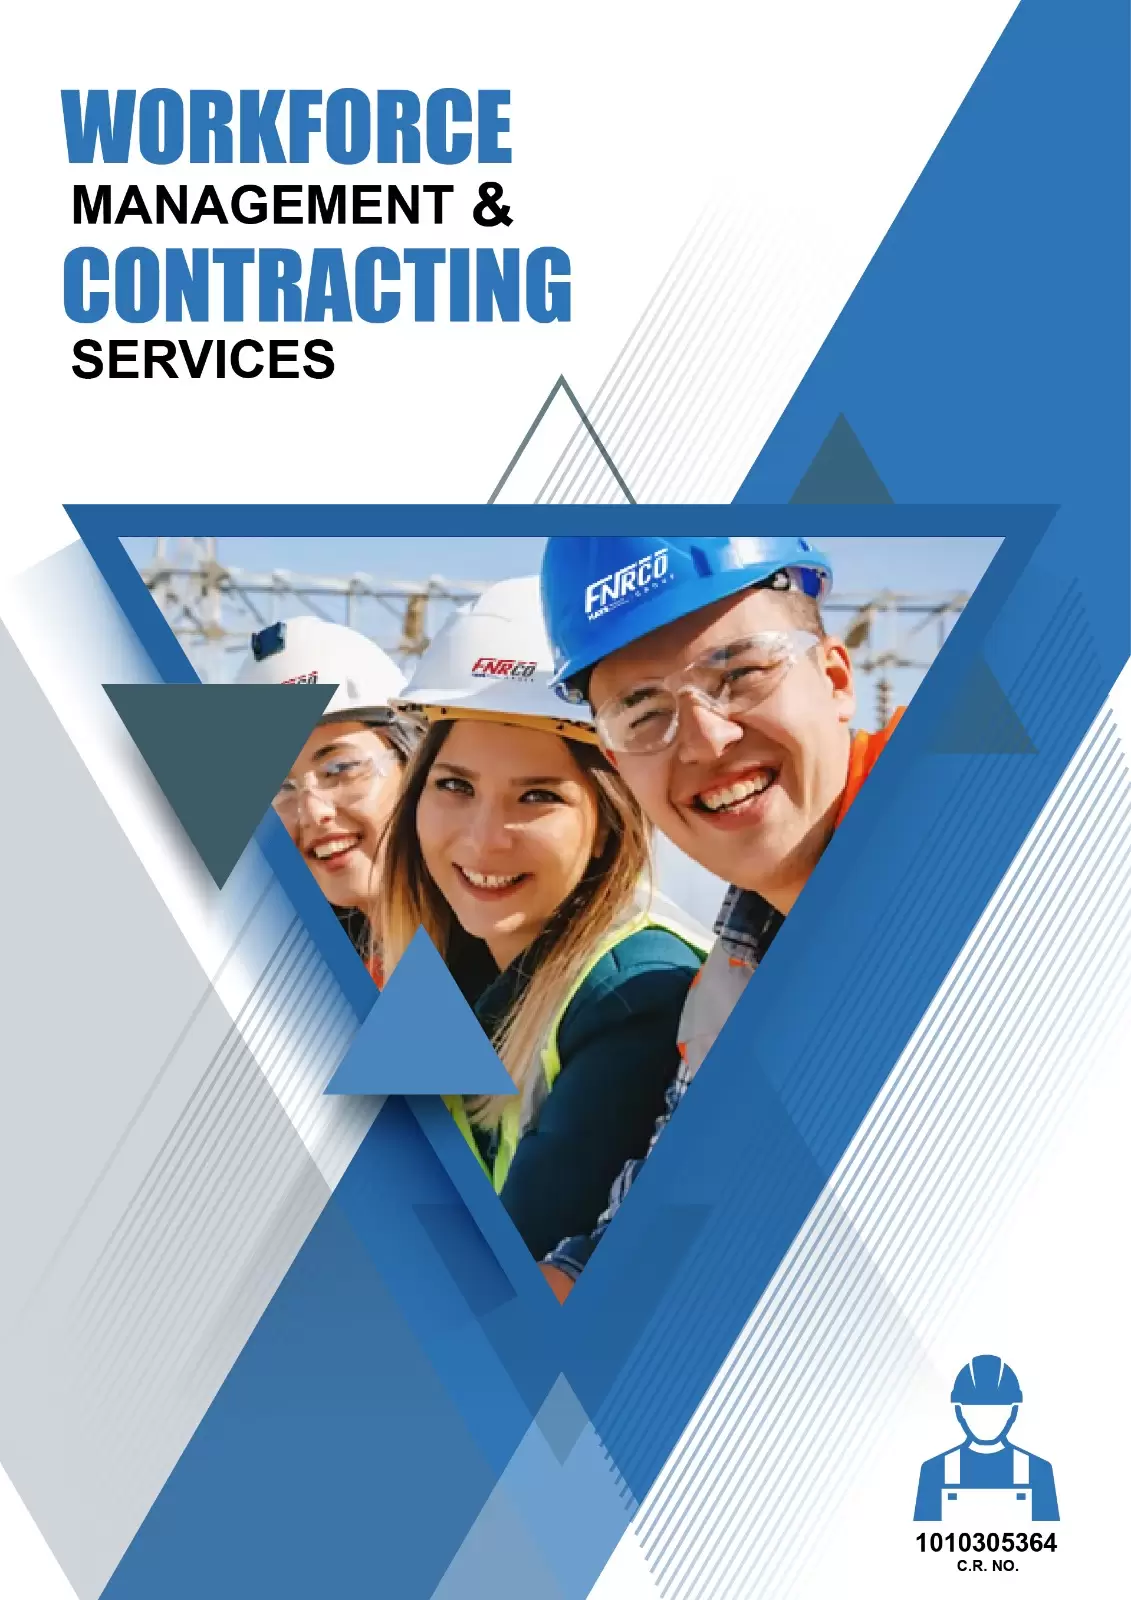 Workforce Management & Contracting Services